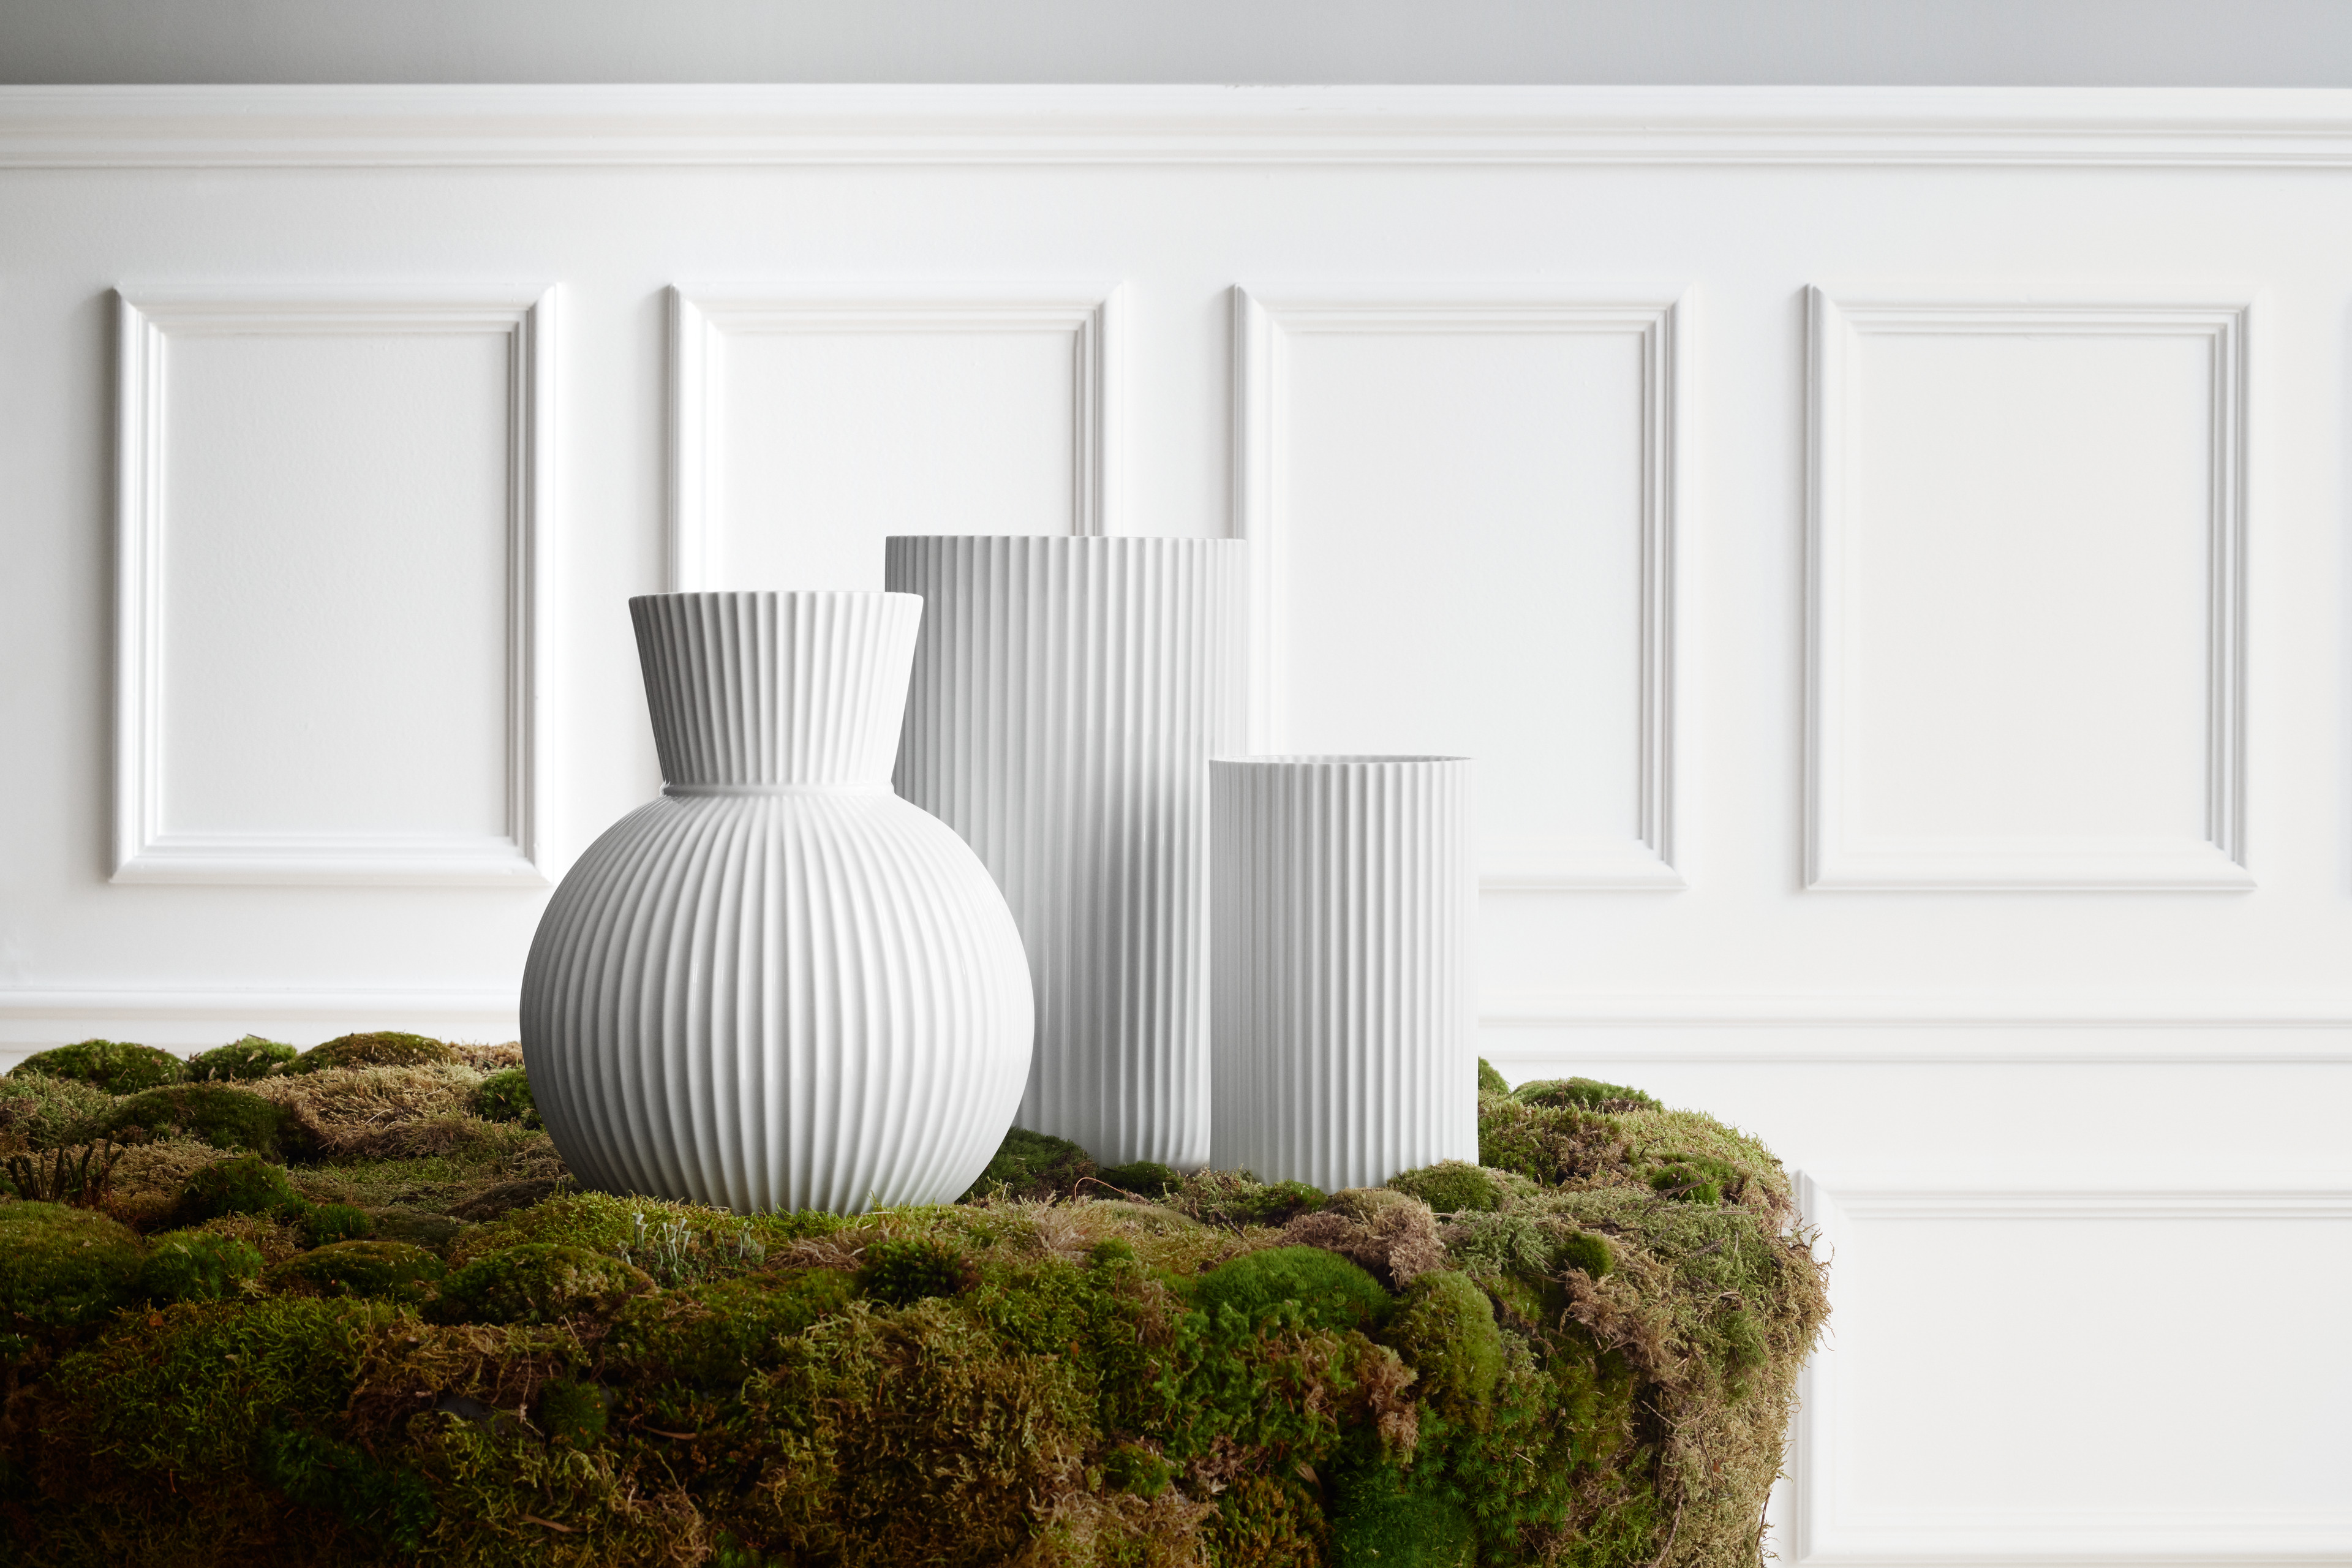 Lyngby vases and Tura vase from Lyngby Porcelæn on moss